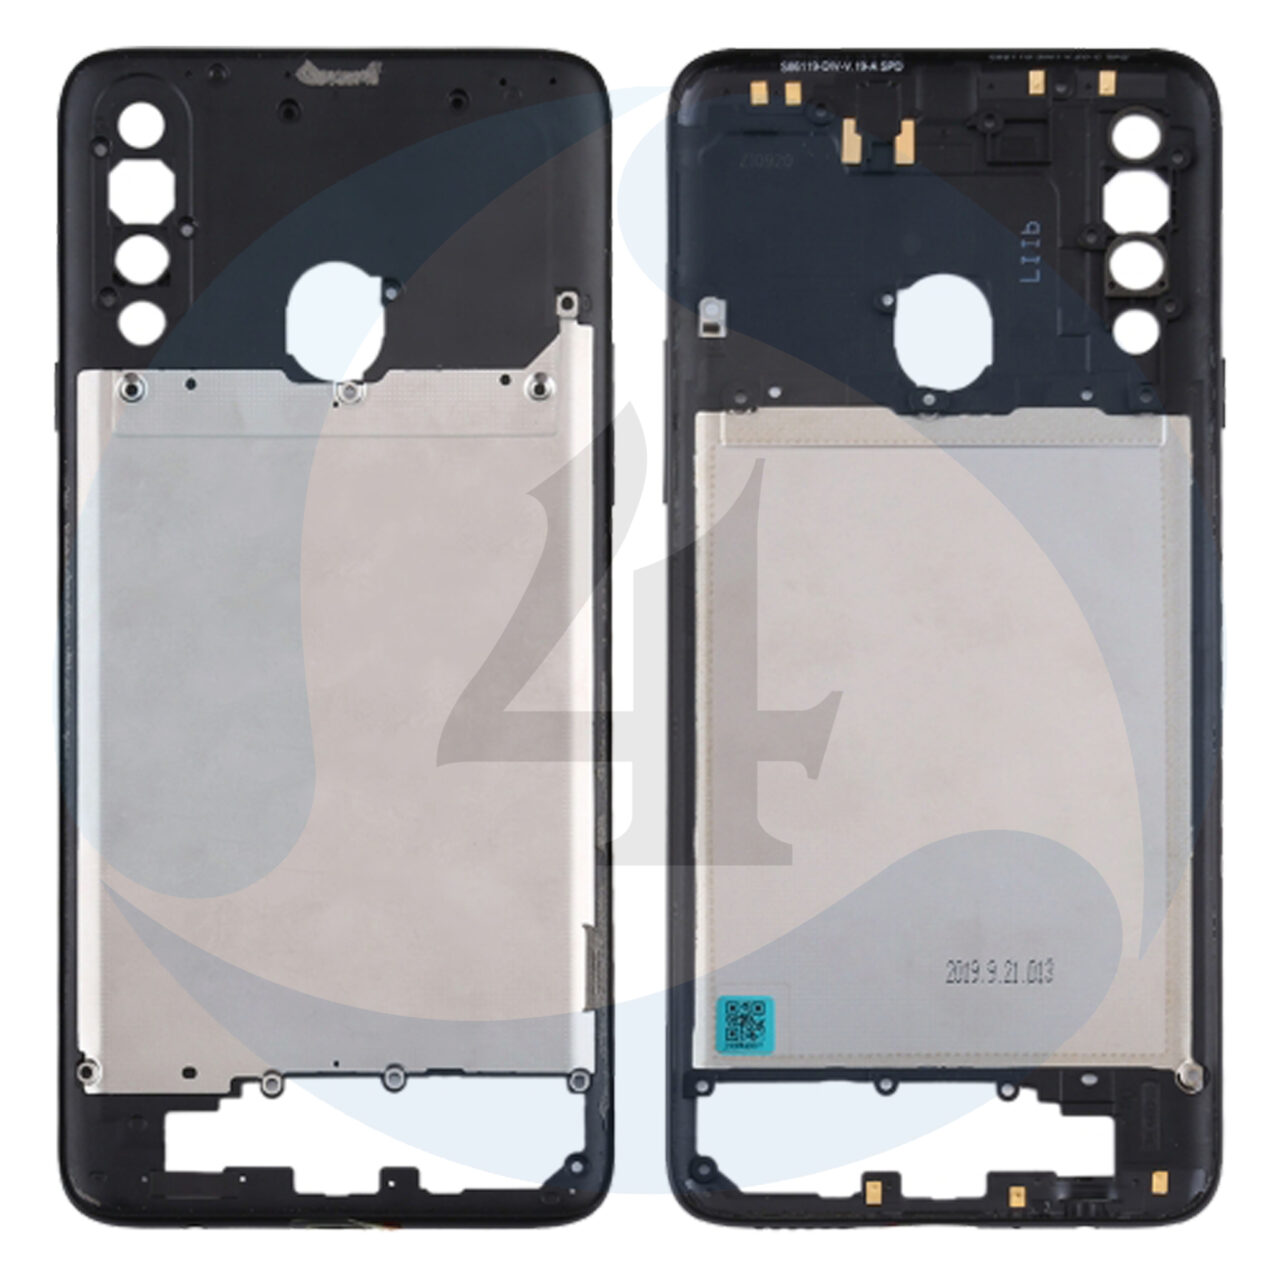 Samsung Galaxy A20s SM A207s F DS Middle Frame Bezel Plate Cover black